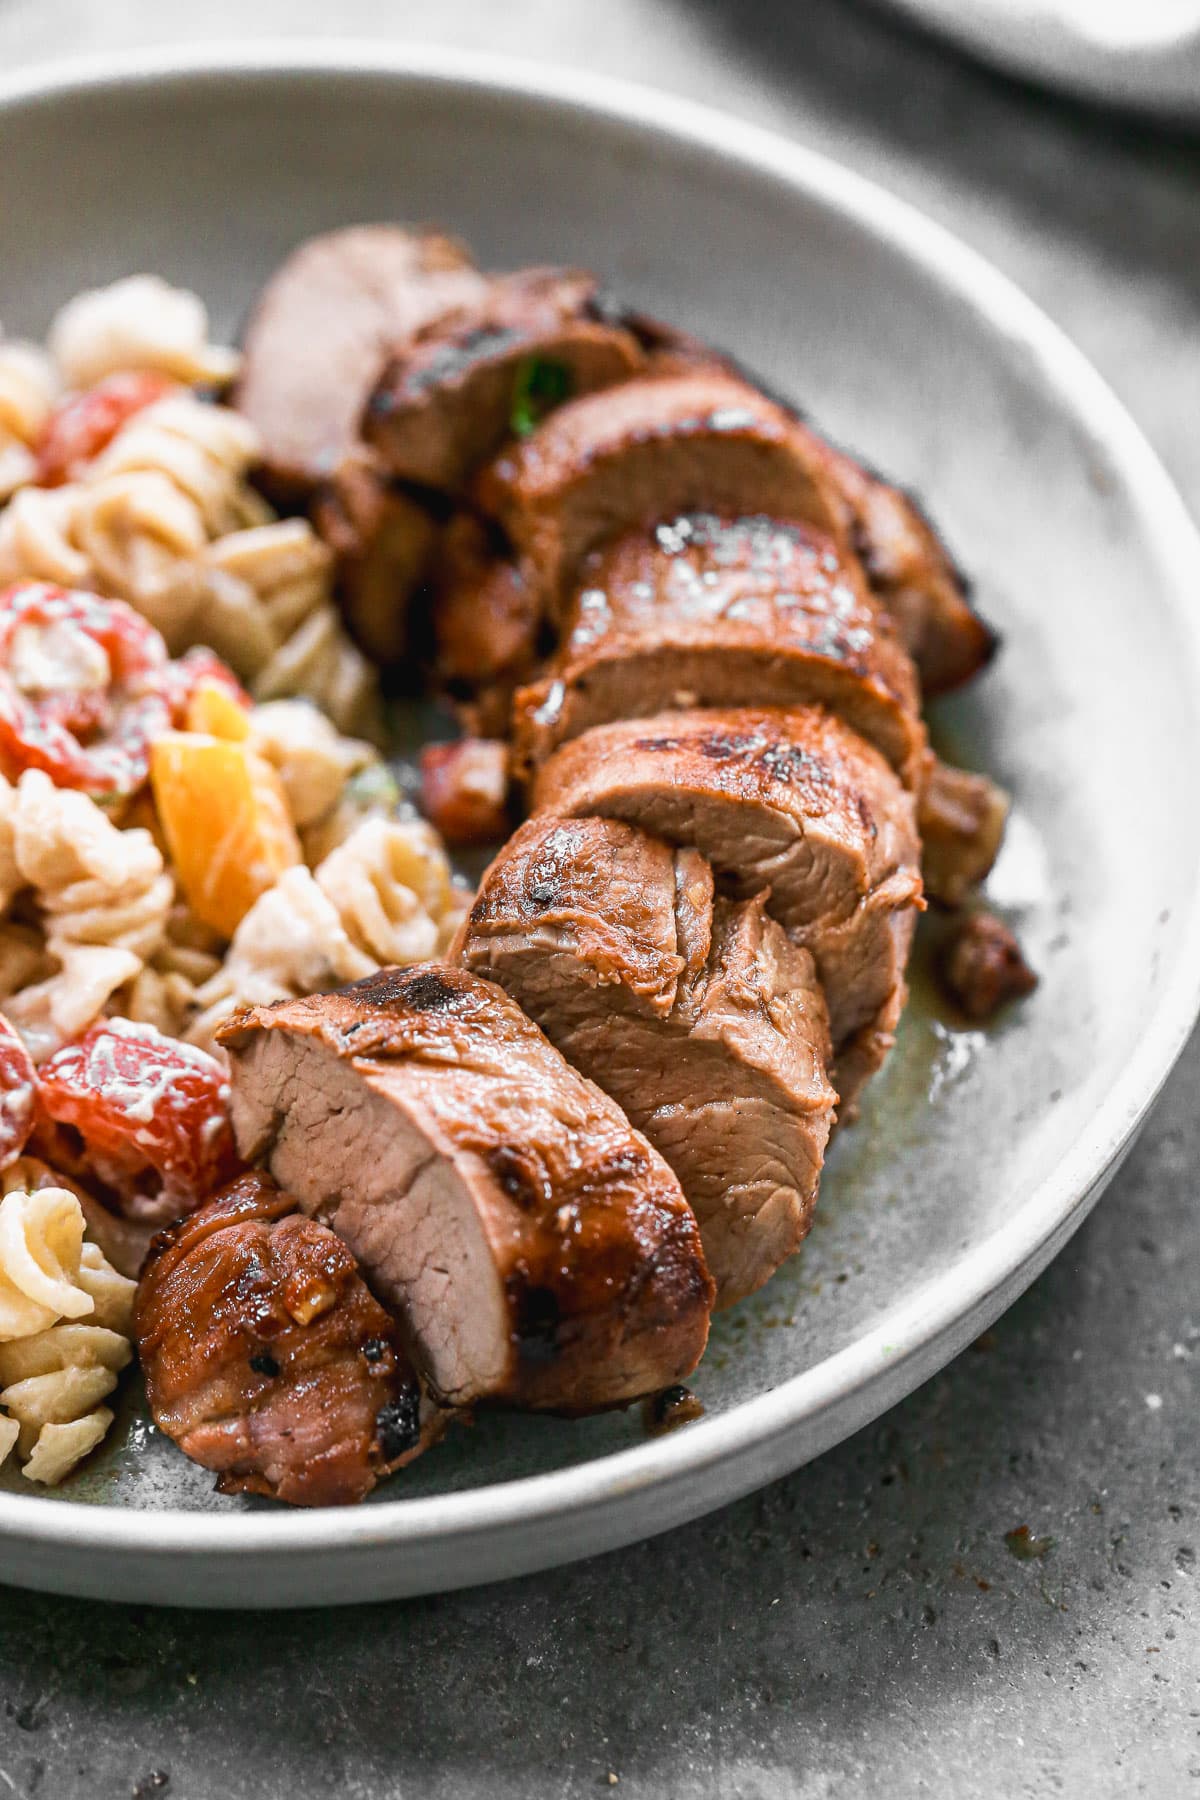 juicy grilled pork tenderloin slices on a plate with pasta salad